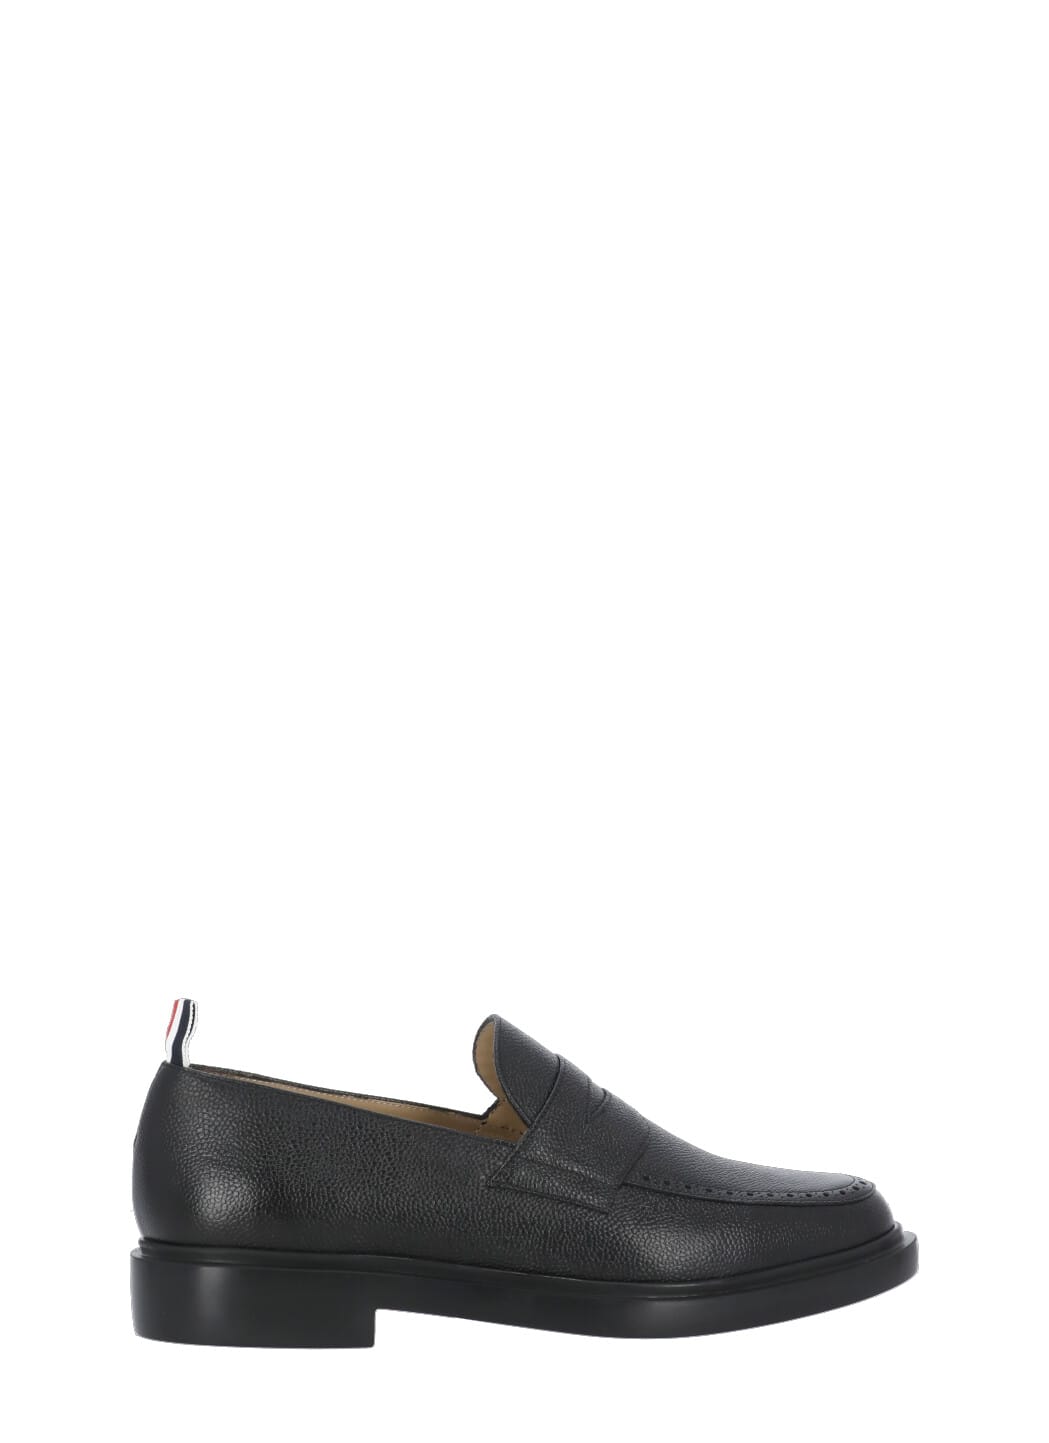 Thom Browne Peeny Loafers